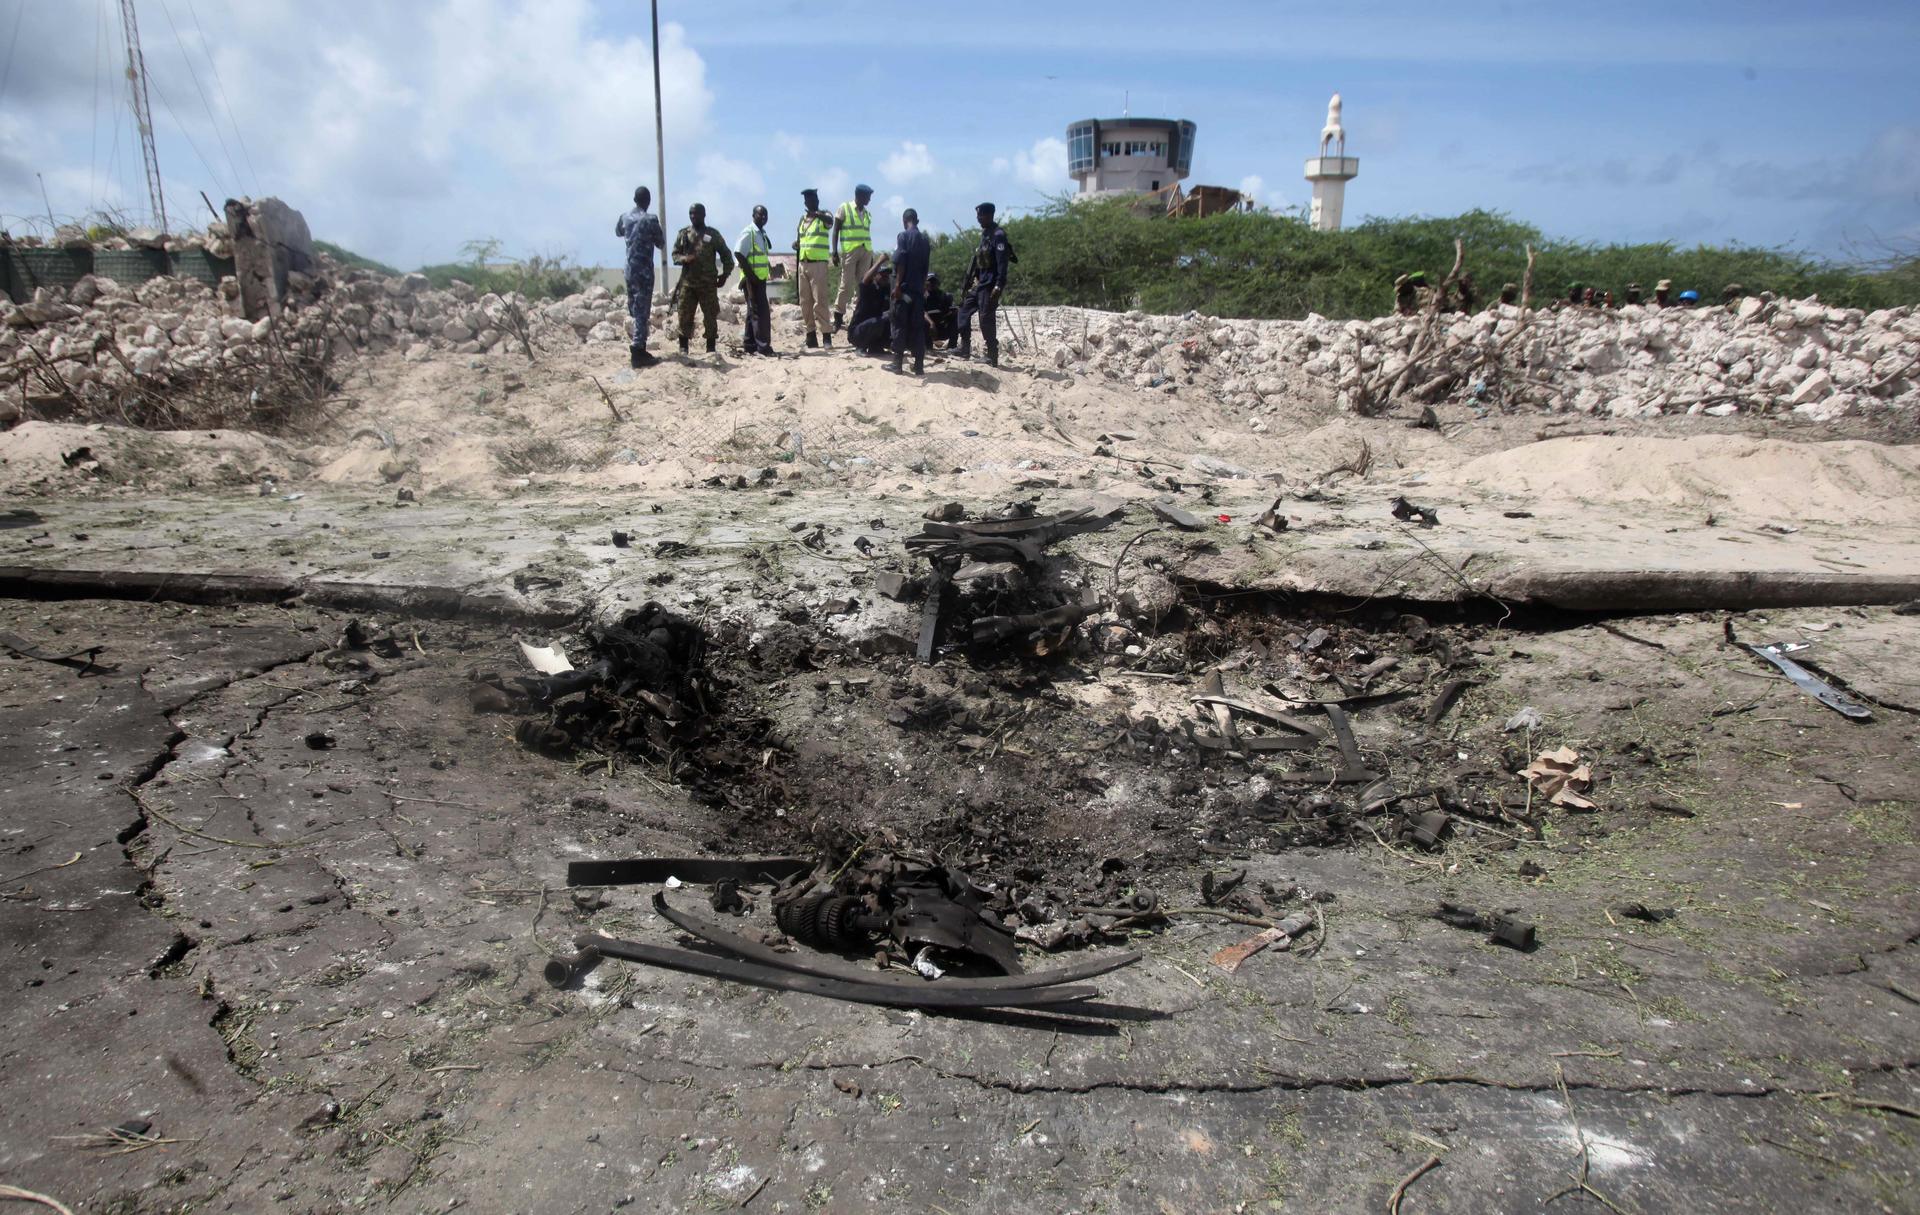 Somali policemen and miltary gather near the scene of a suicide bombing near the African Union's main peacekeeping base in Mogadishu, Somalia, July 26, 2016.